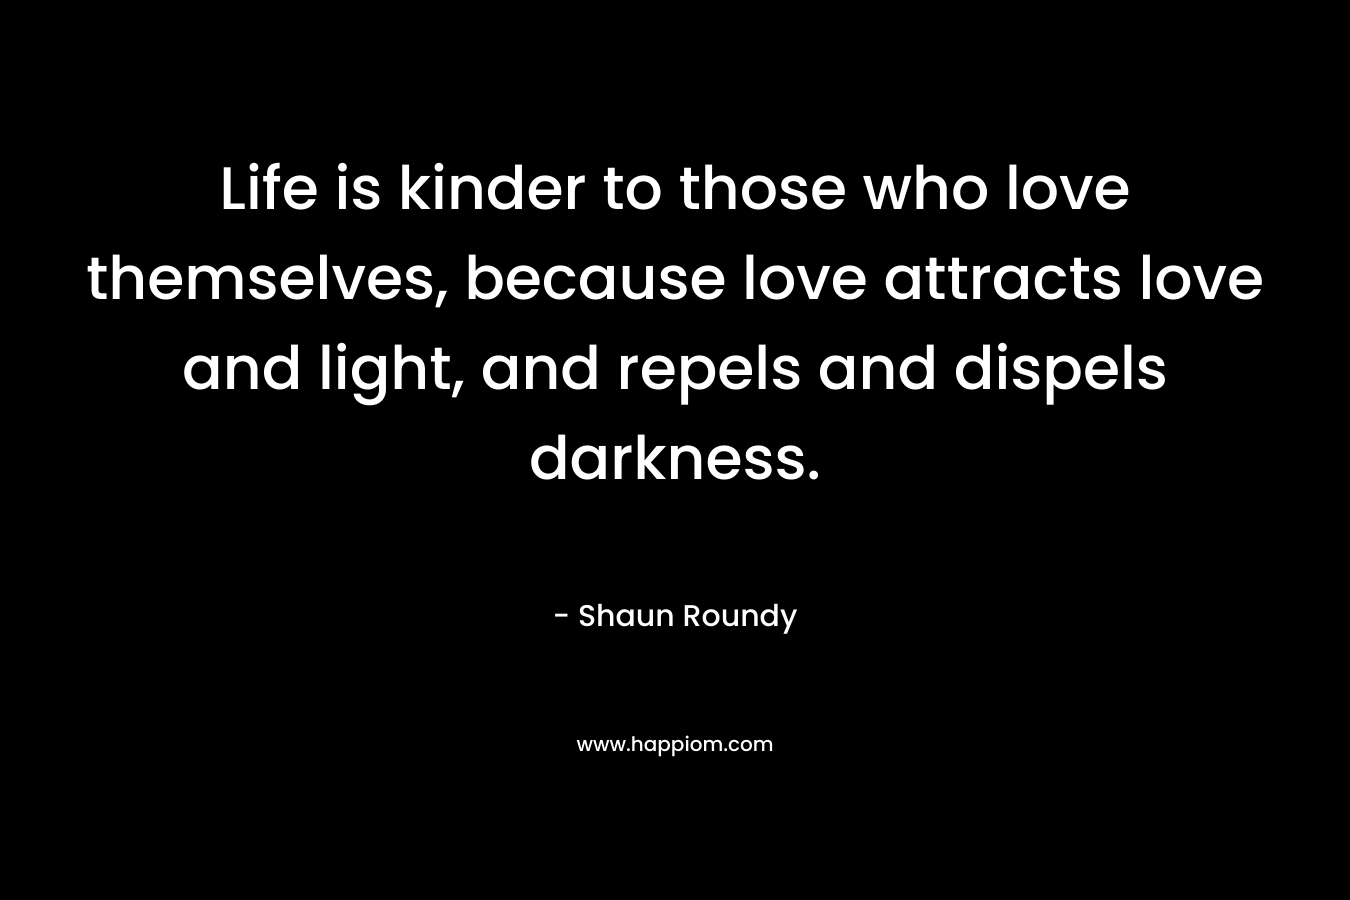 Life is kinder to those who love themselves, because love attracts love and light, and repels and dispels darkness. – Shaun Roundy